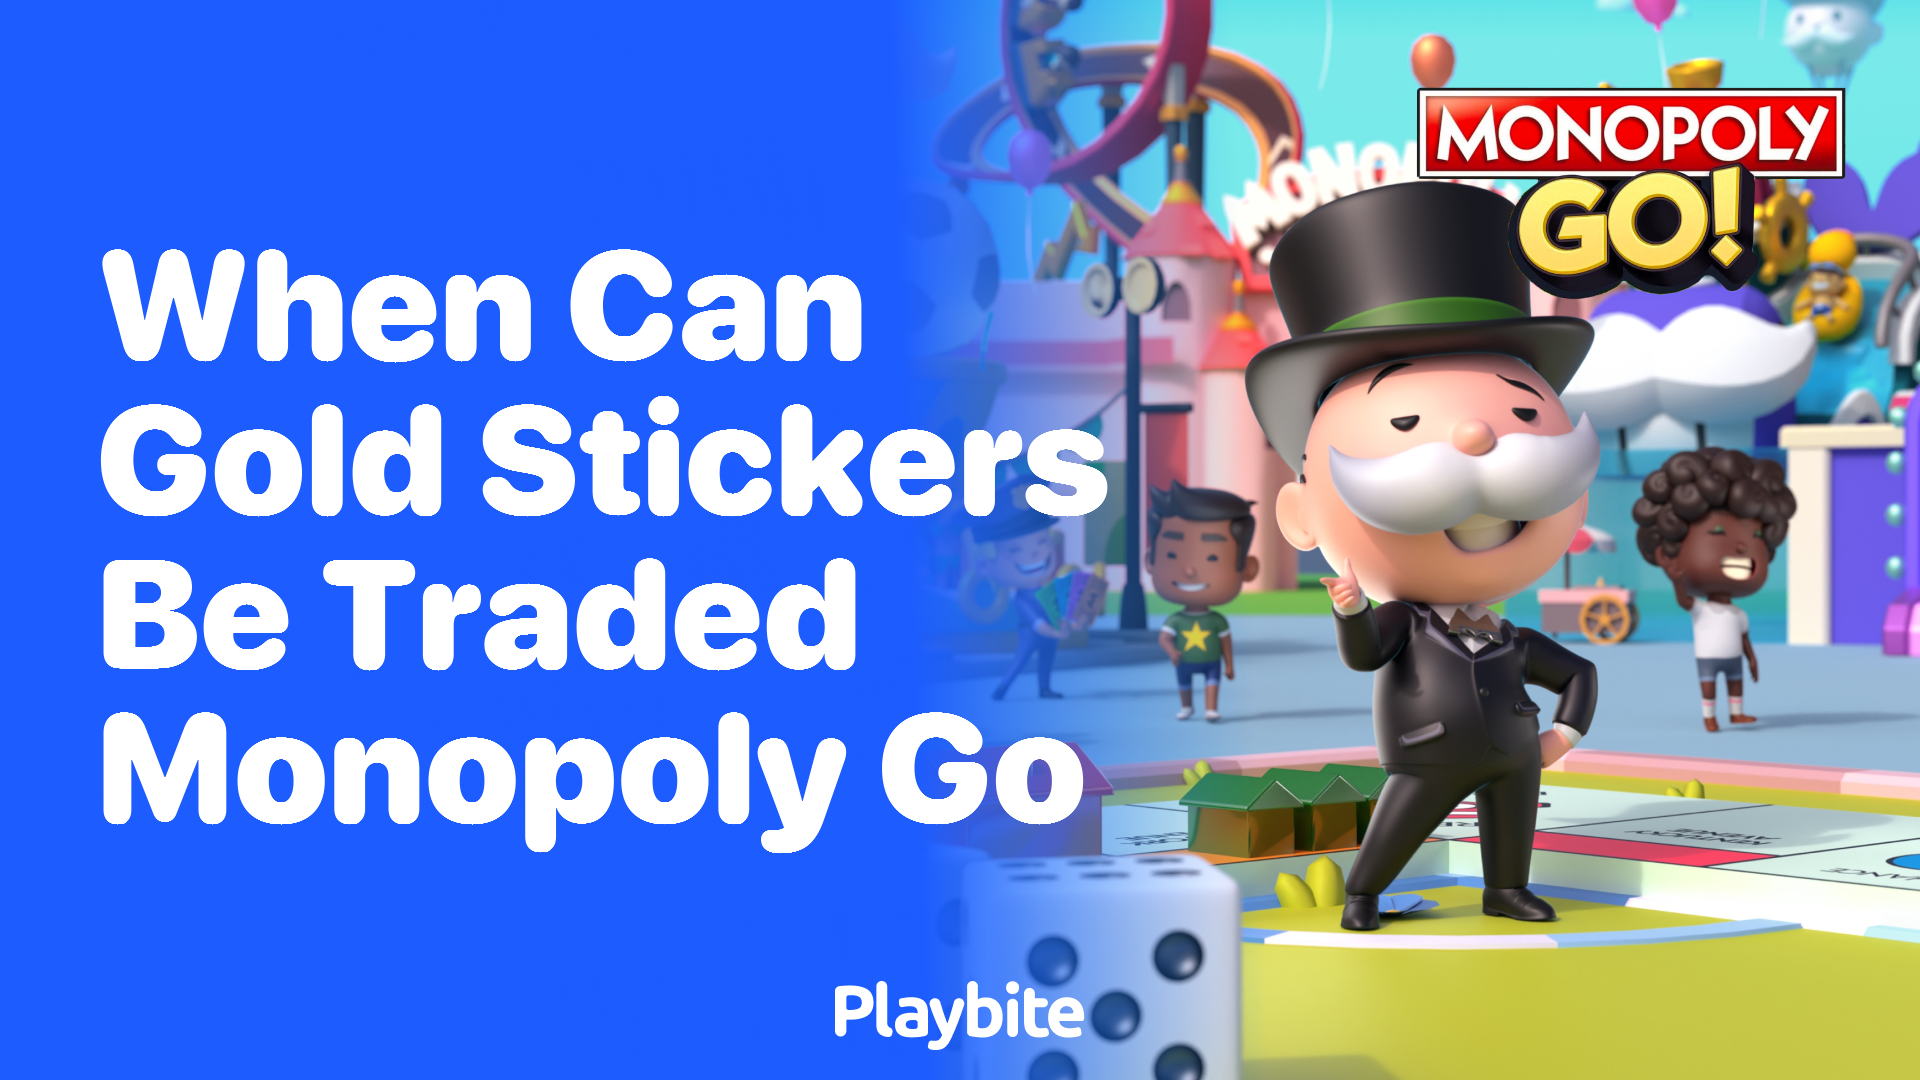 When Can Gold Stickers Be Traded in Monopoly Go?